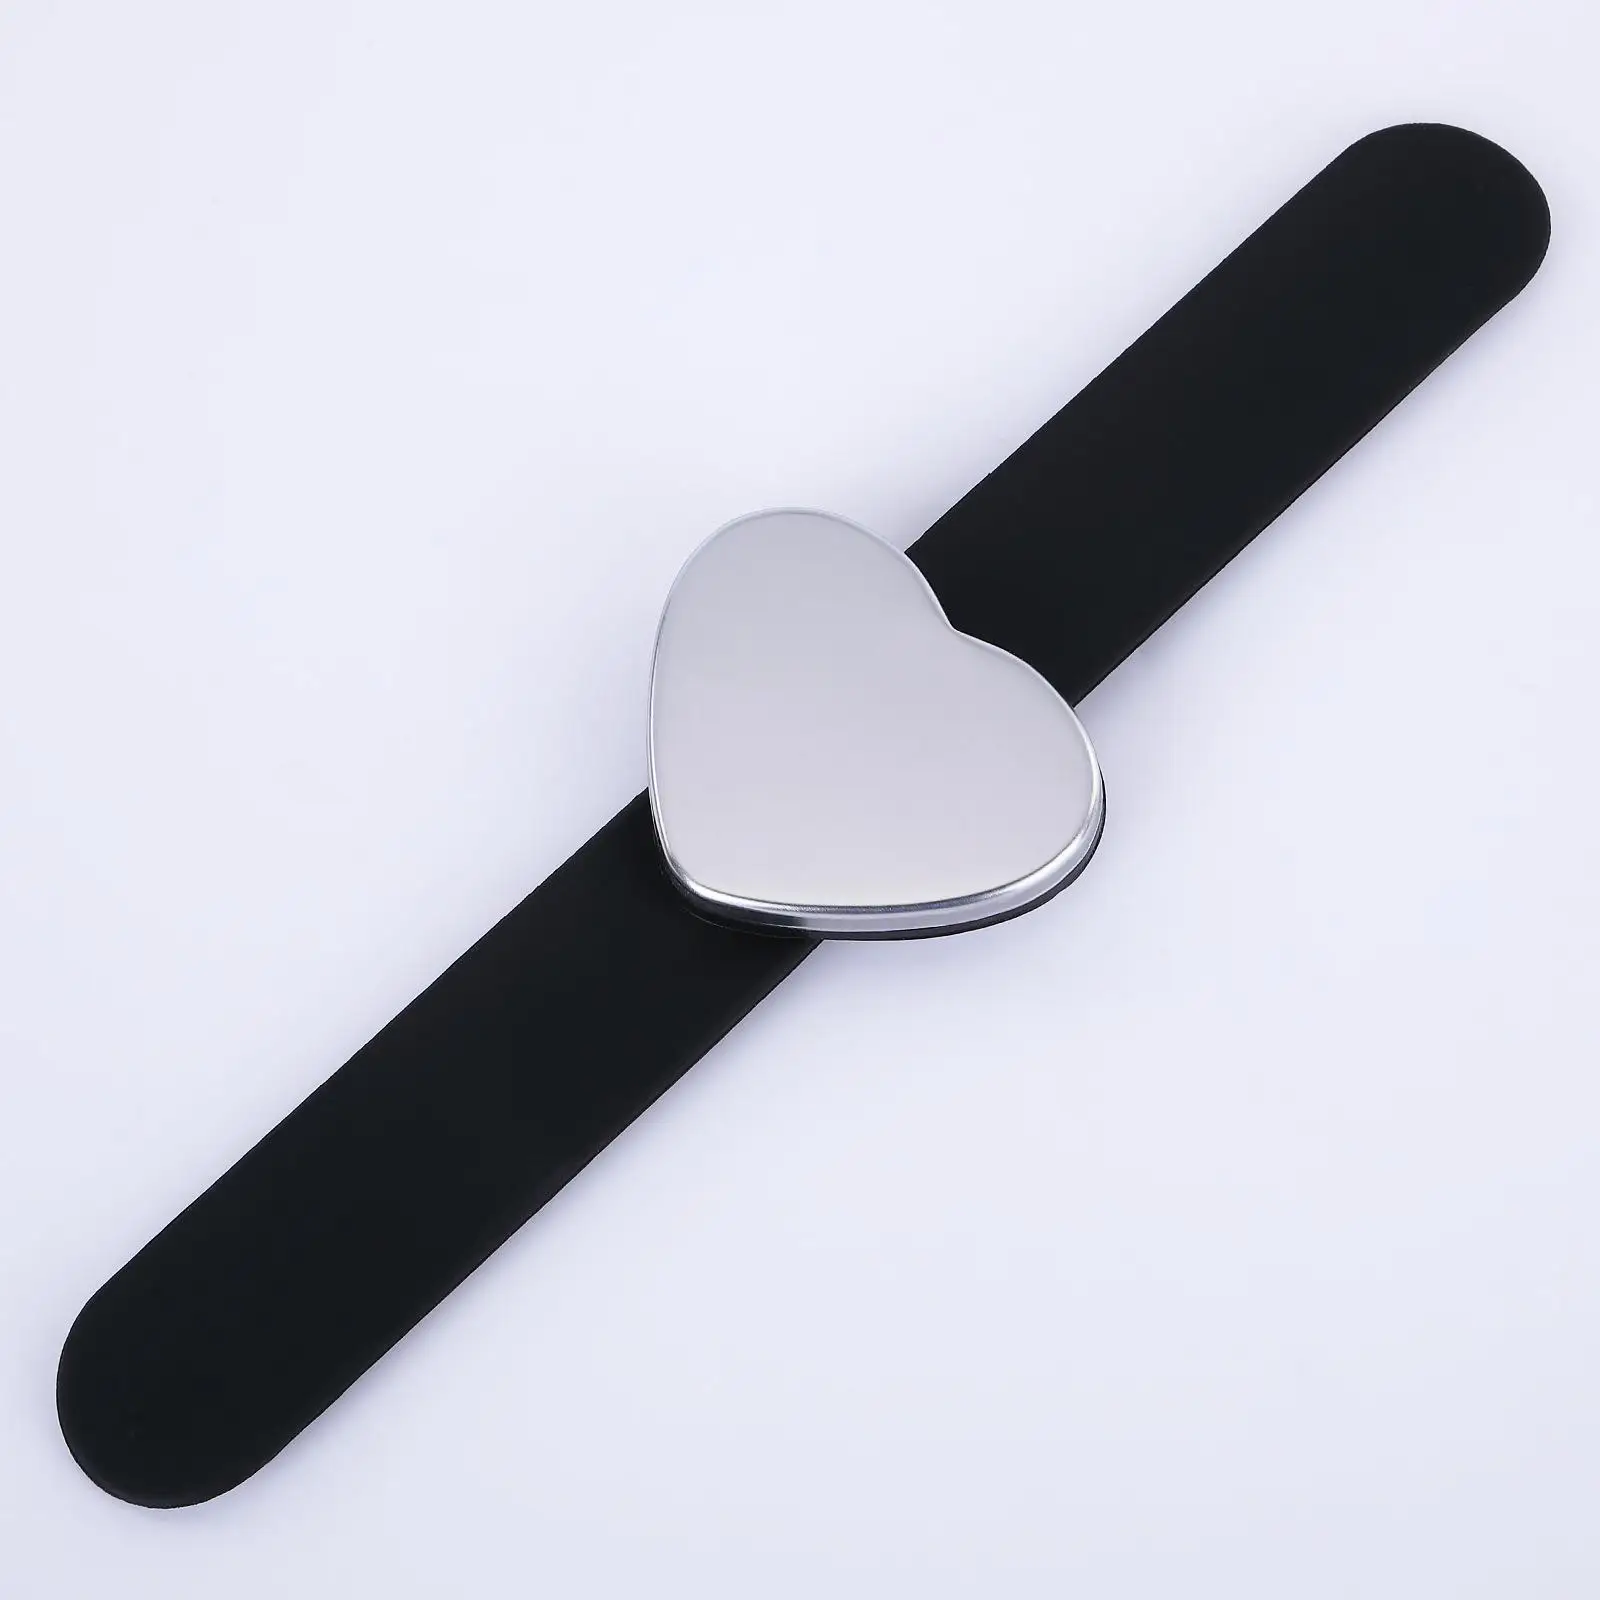 Magnetic Wrist Band Needle Sucker Pintail Silicone Quilters Pintail Comb Sewing Pincushion Pin Holder Wristband Salon Use